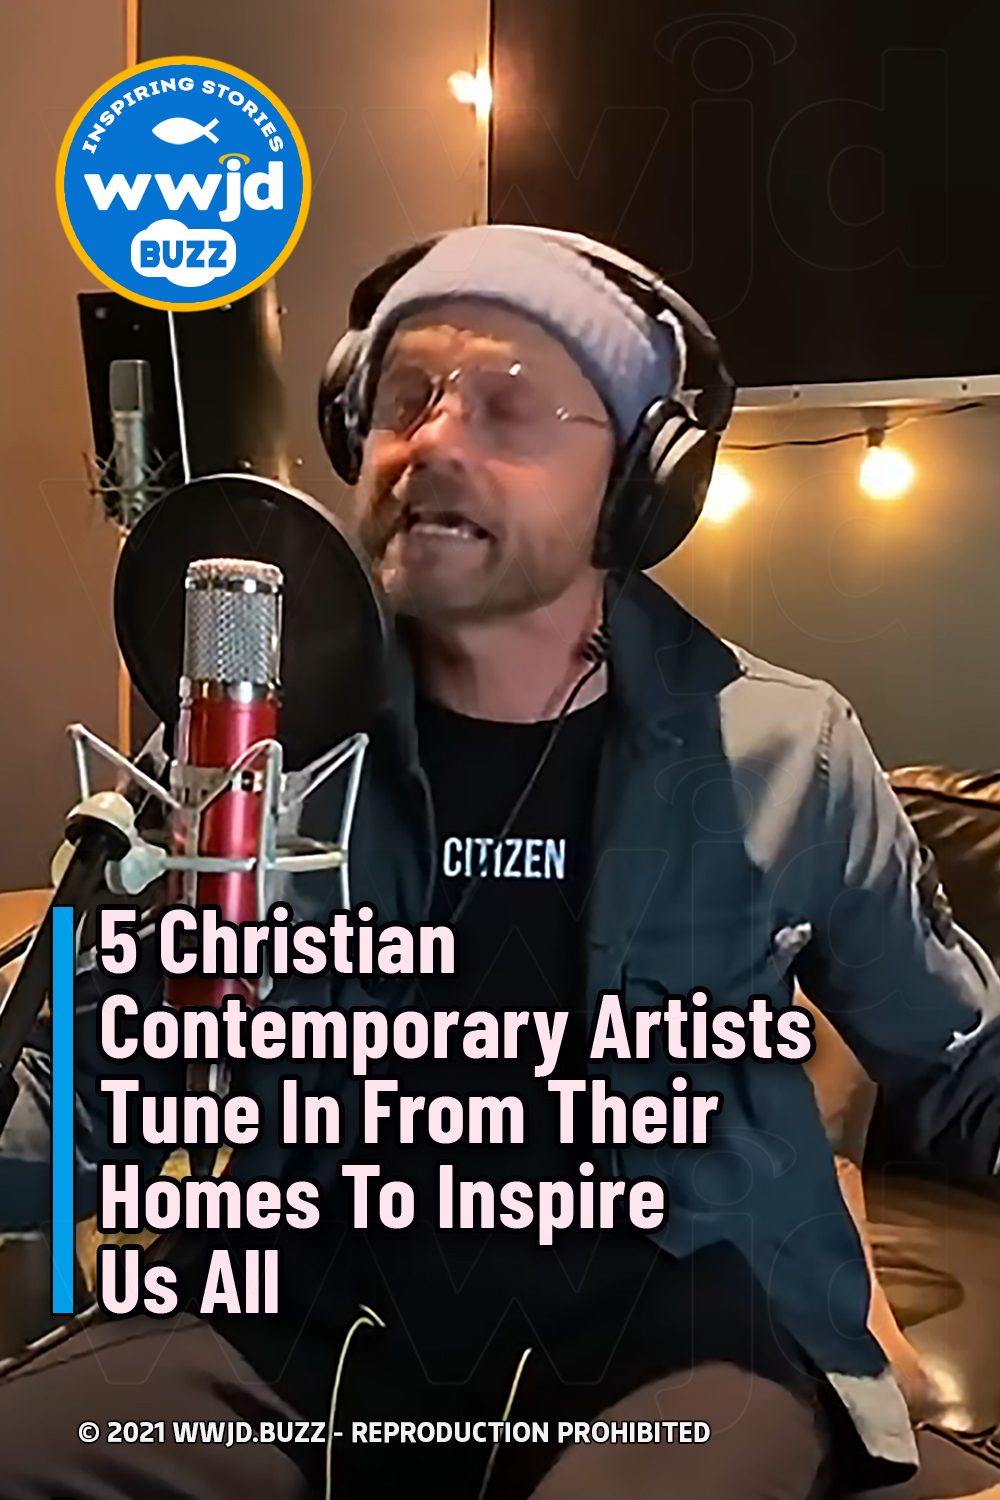 5 Christian Contemporary Artists Tune In From Their Homes To Inspire Us All